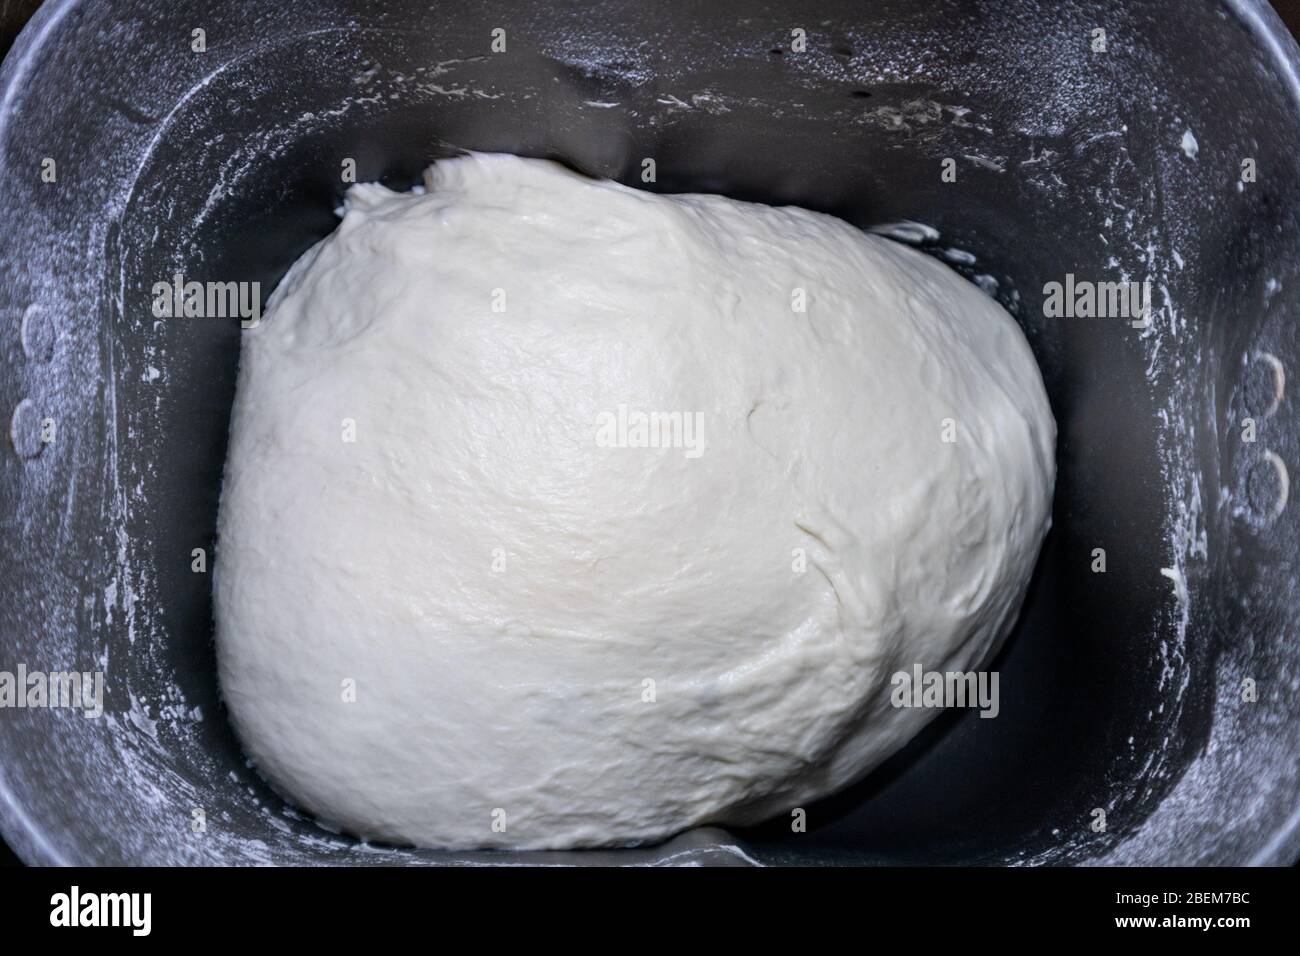 Bread dough in bread maker machine dispenser. Just mixed ready to rise fresh white home made bread pizza pastry duff cooking process close-up on dark Stock Photo